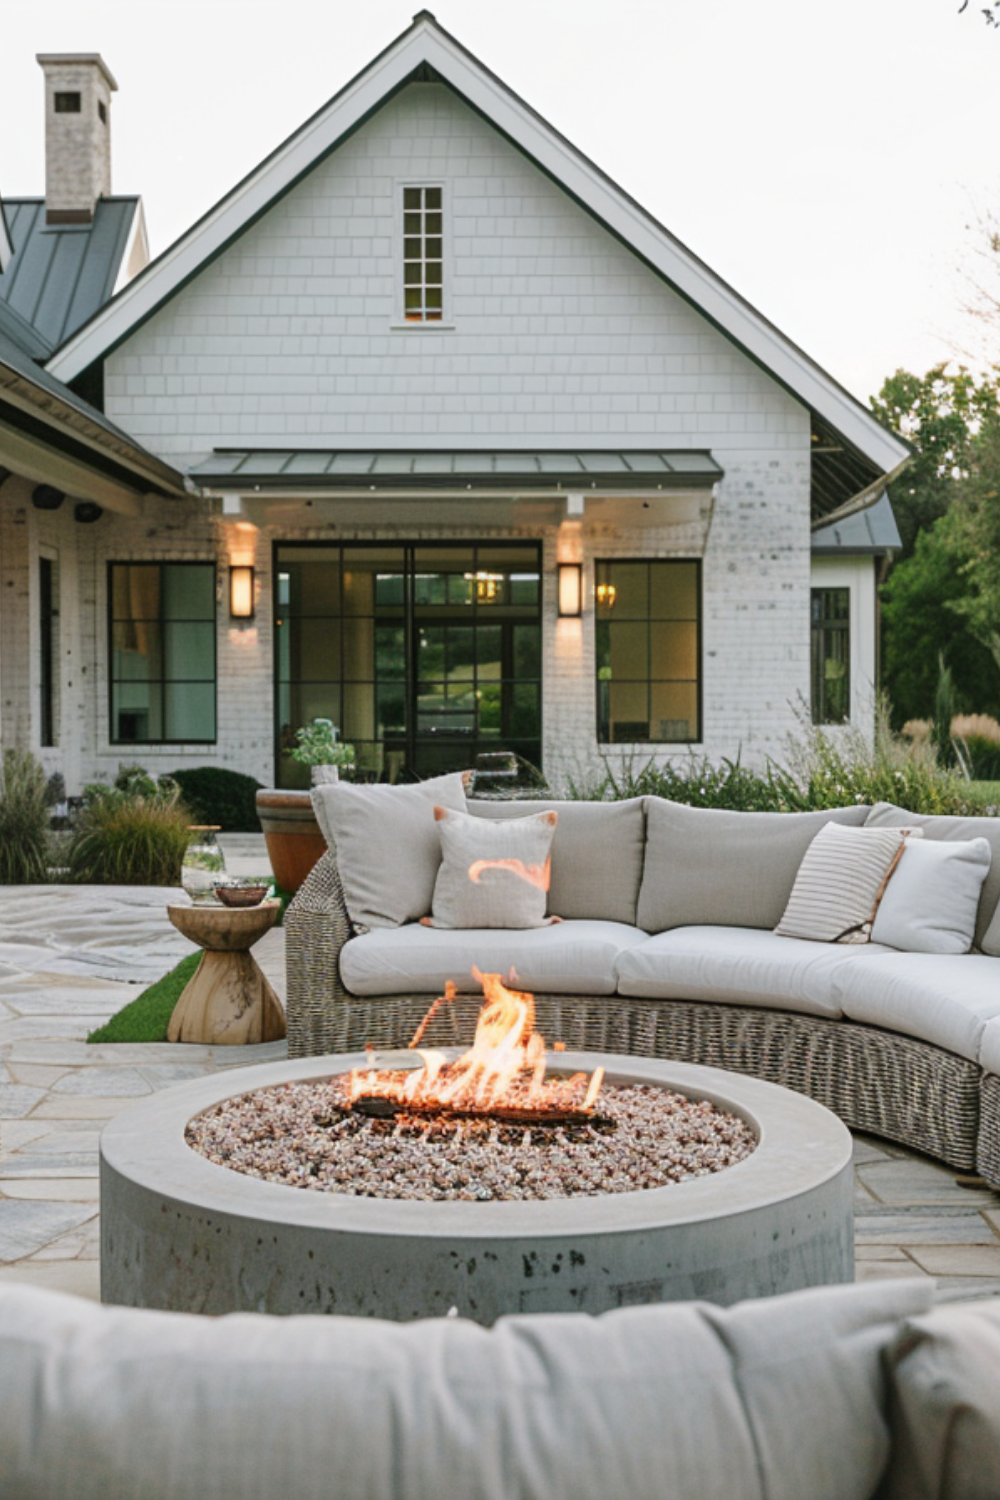 Create a Tranquil Outdoor Oasis with These Cozy Patio Ideas